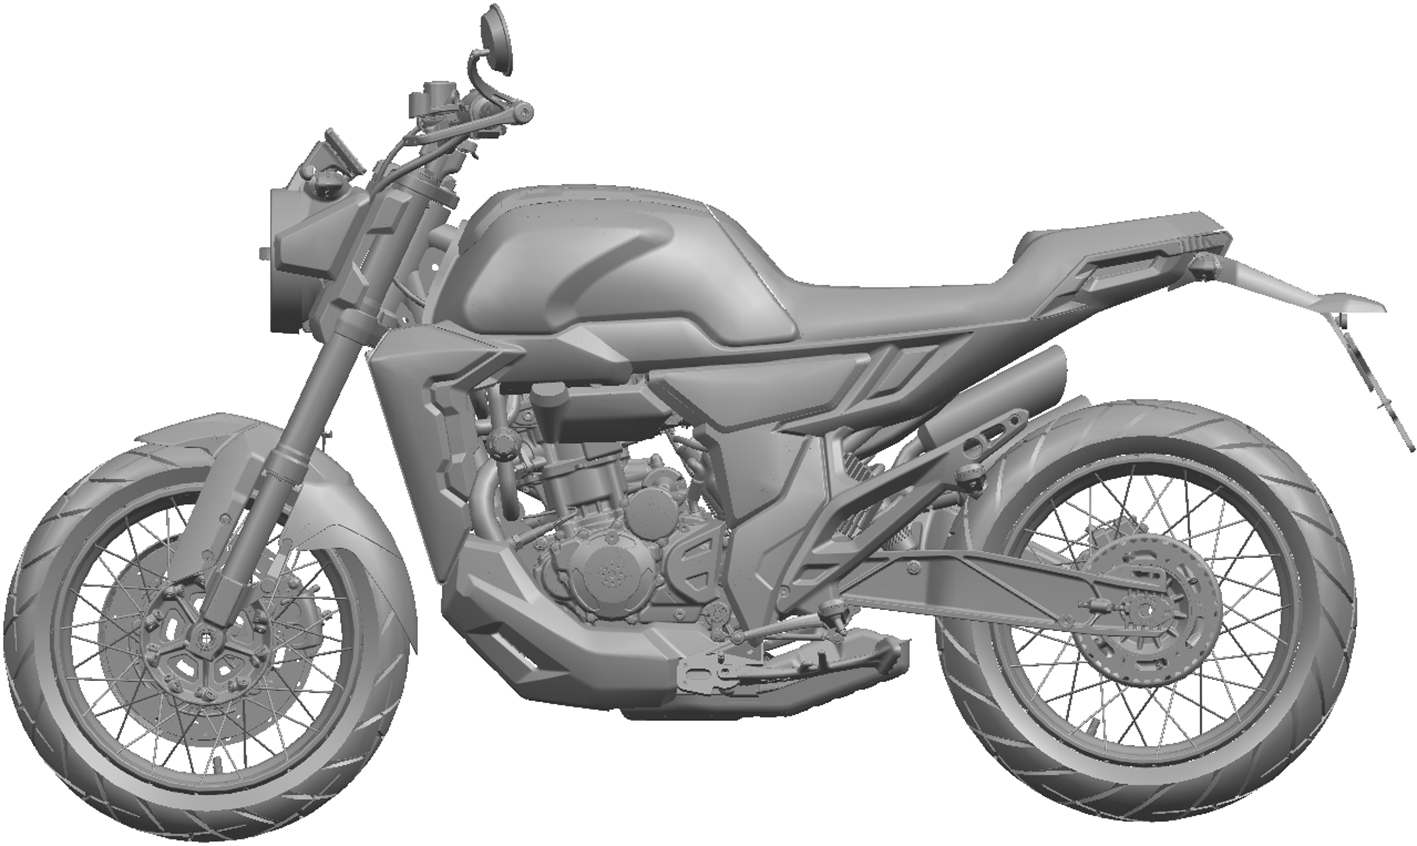 Zontes 350GK Patents Reveal Next-Gen Model | Cycle World